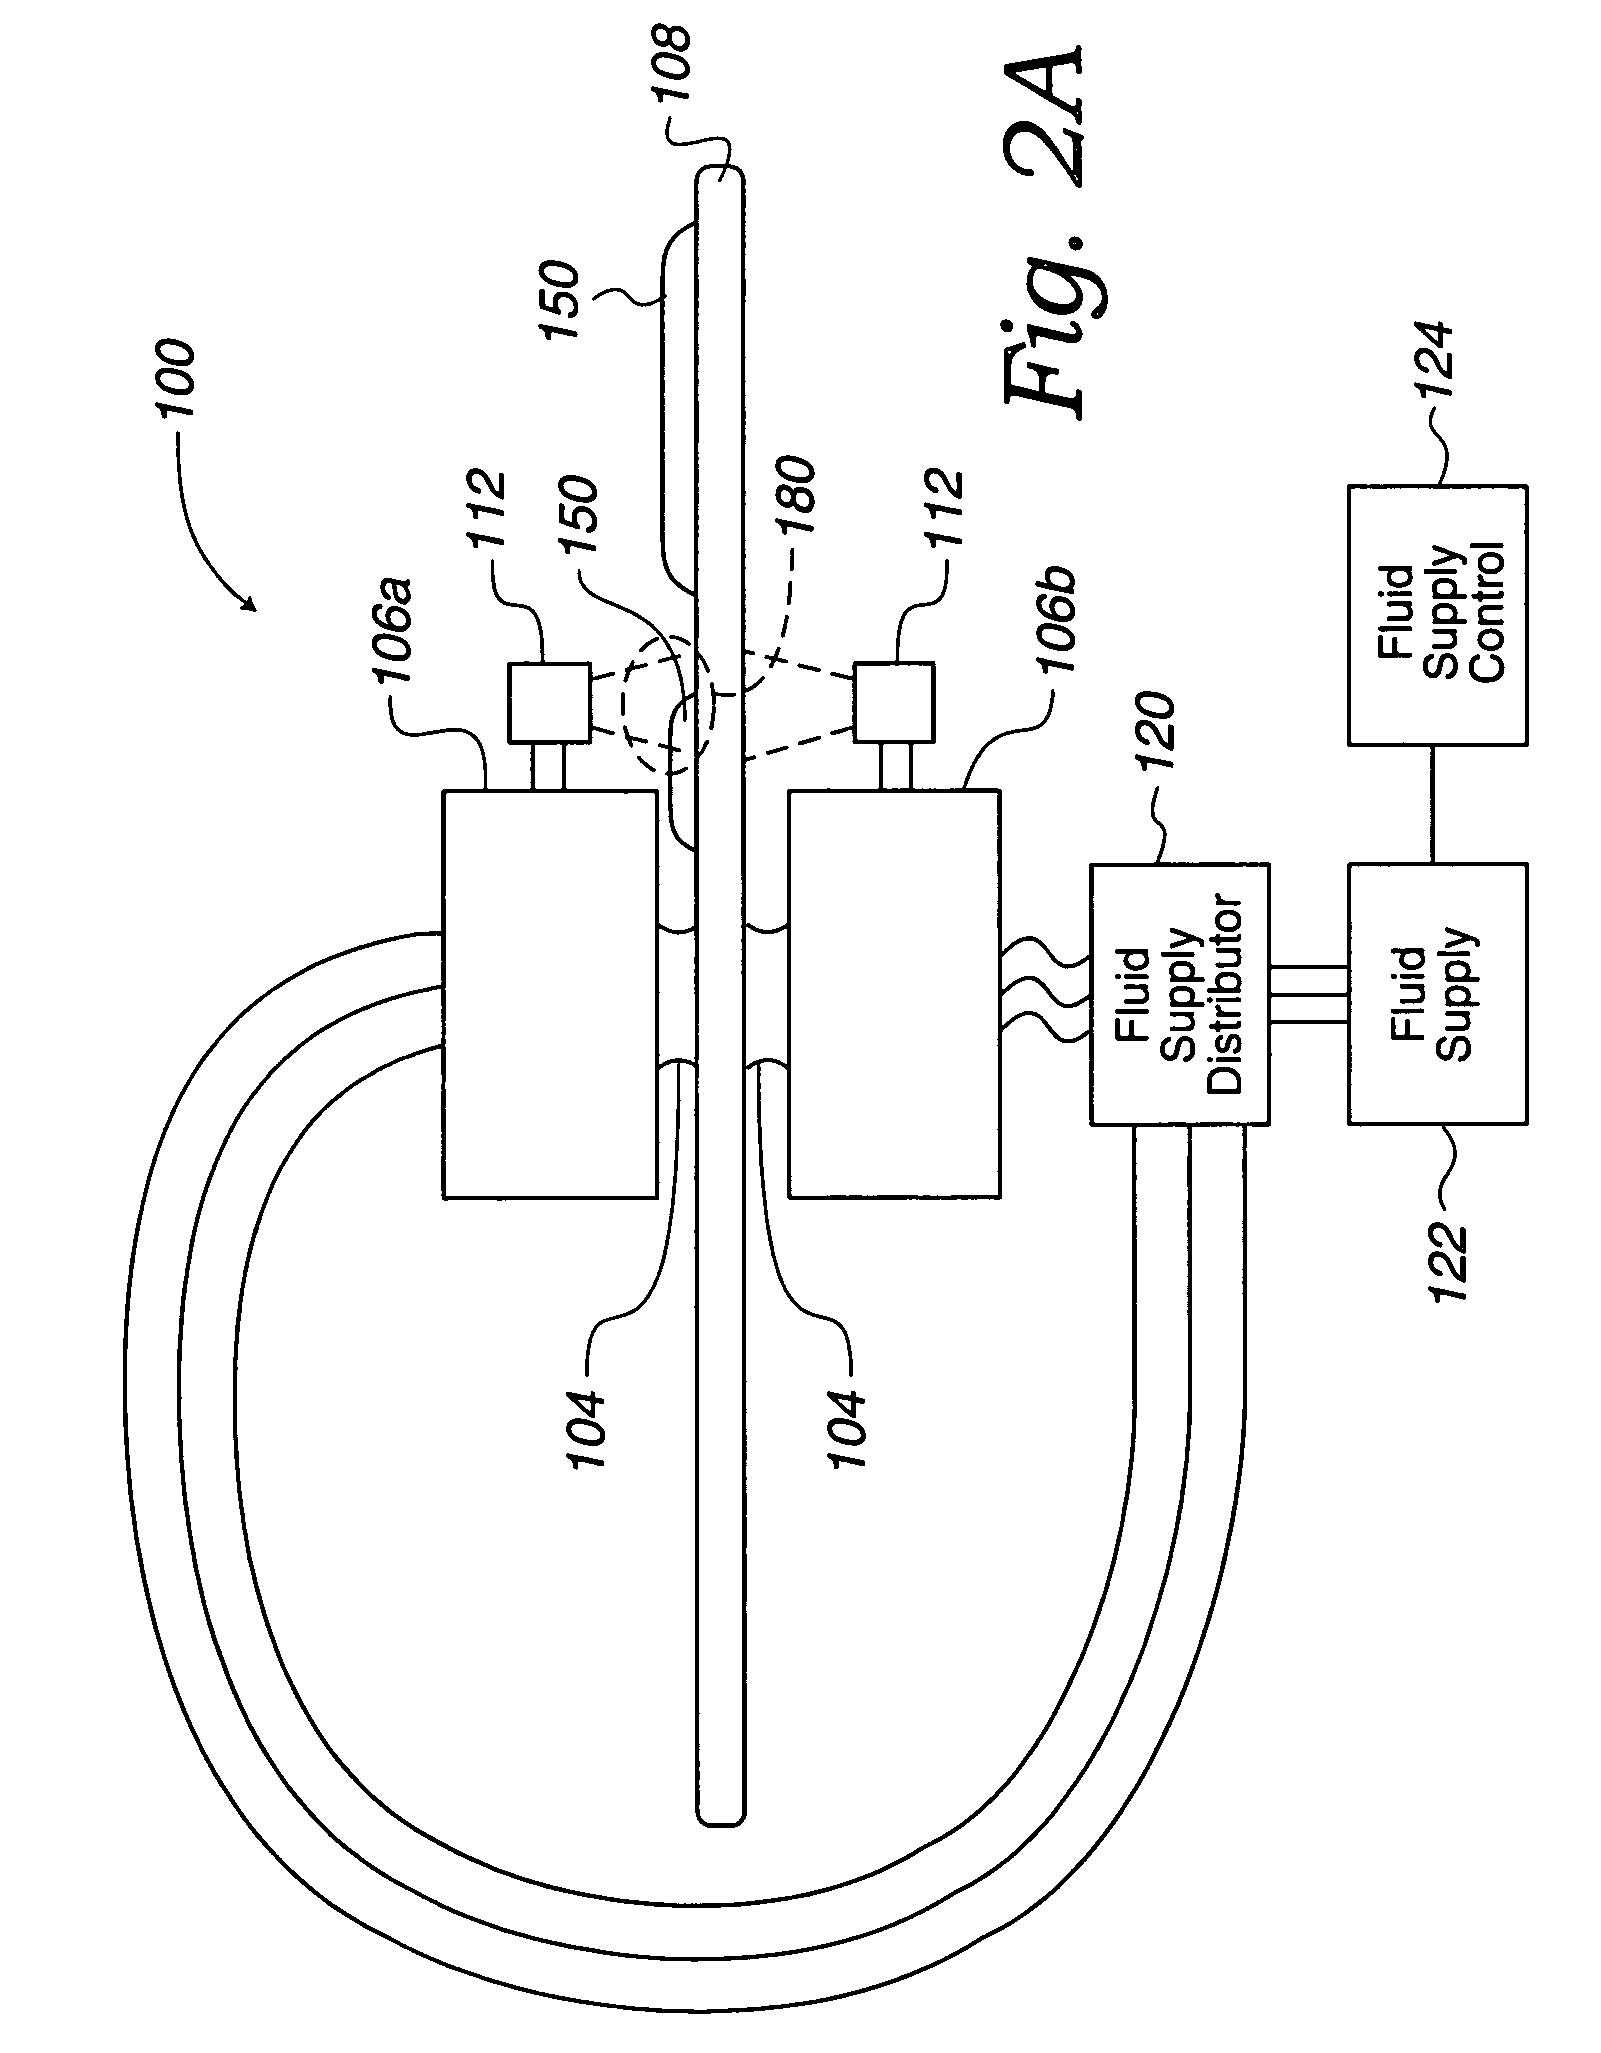 Controls of ambient environment during wafer drying using proximity head